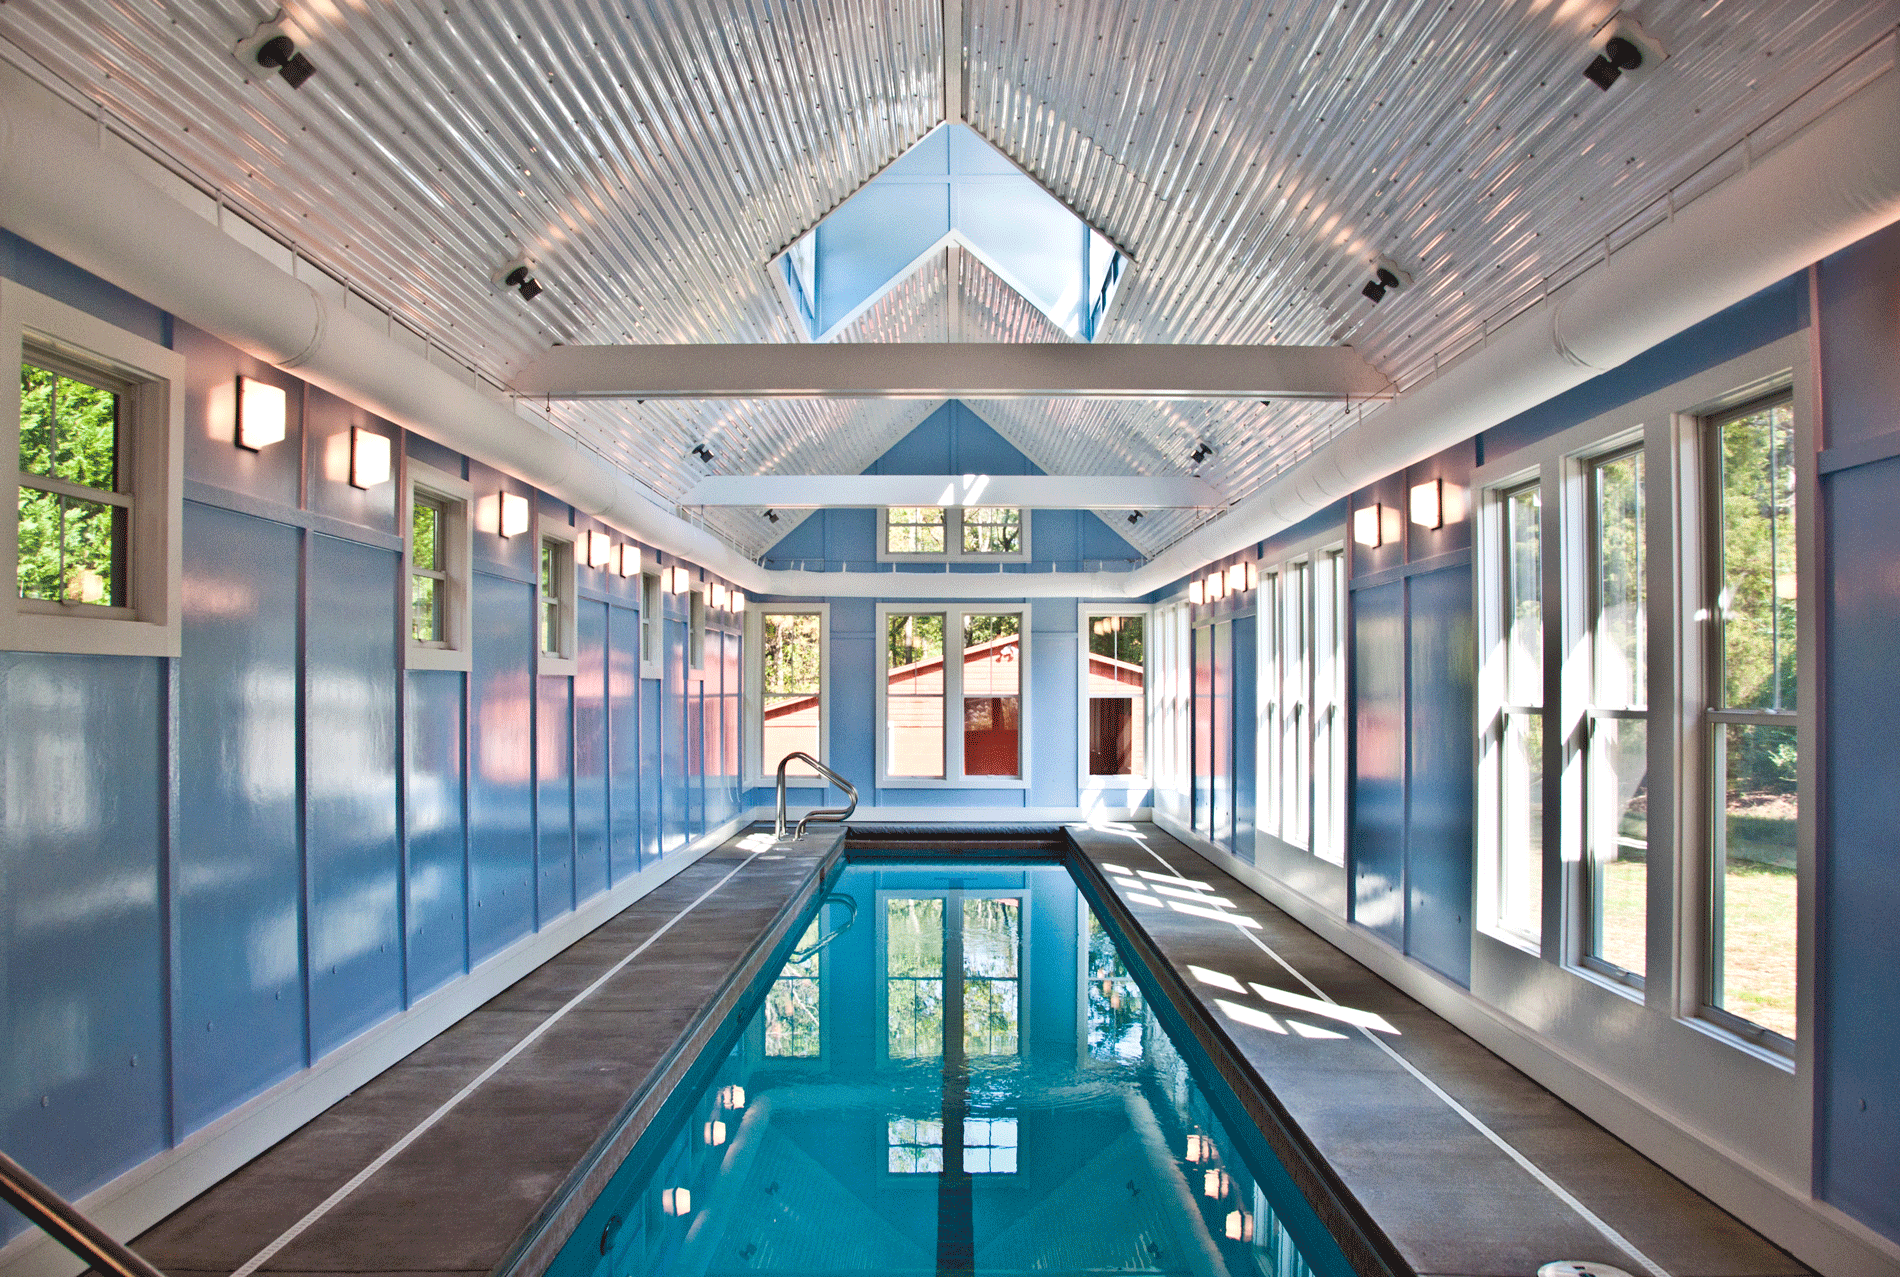 A bottom lit indoor lap pool in a bright and airy room with vaulted corrugated metal ceiling